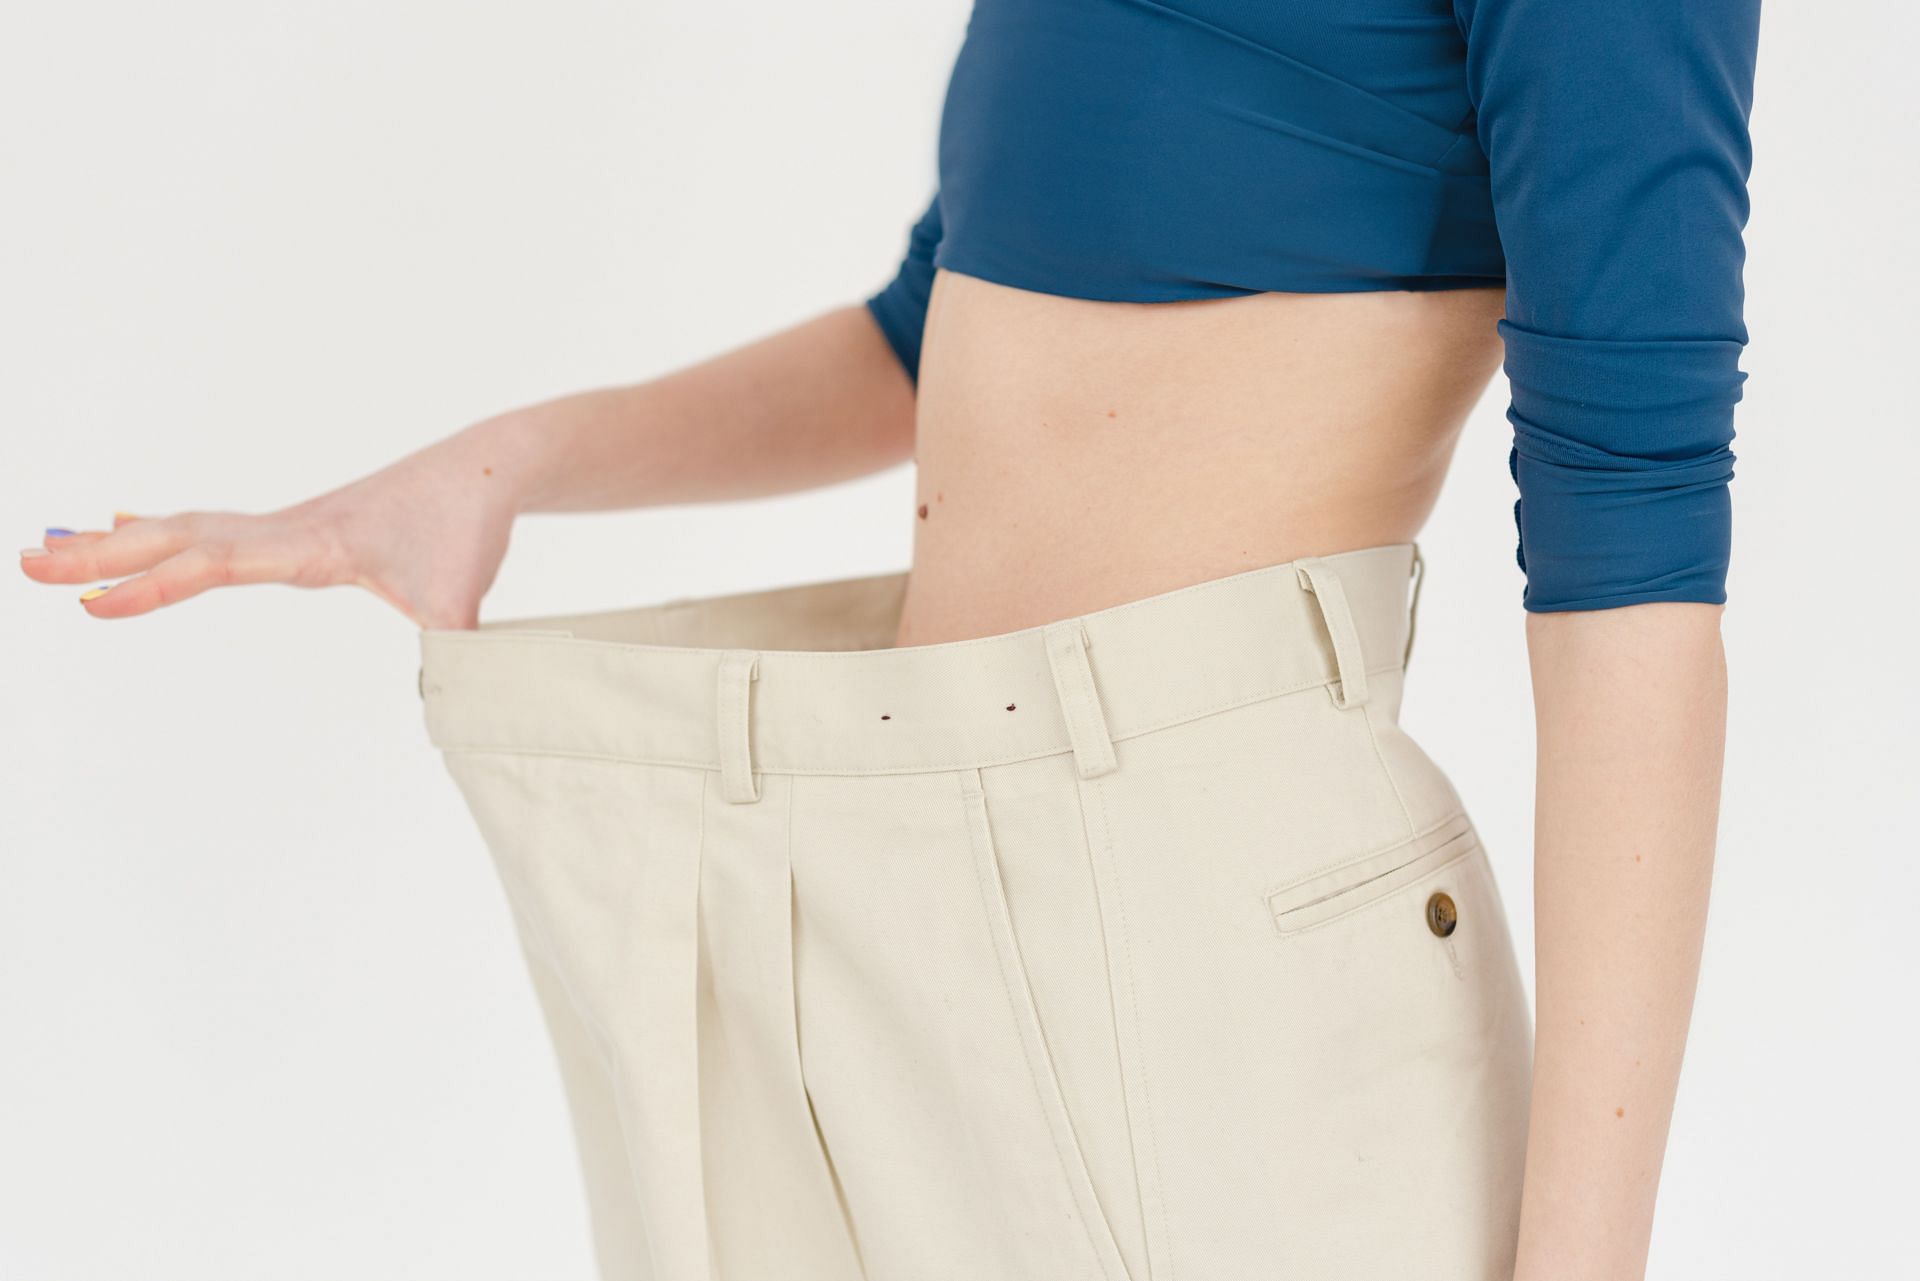 Exercise and diet both are important for trimming waistline. (Image via Pexels/ Shvets Production)